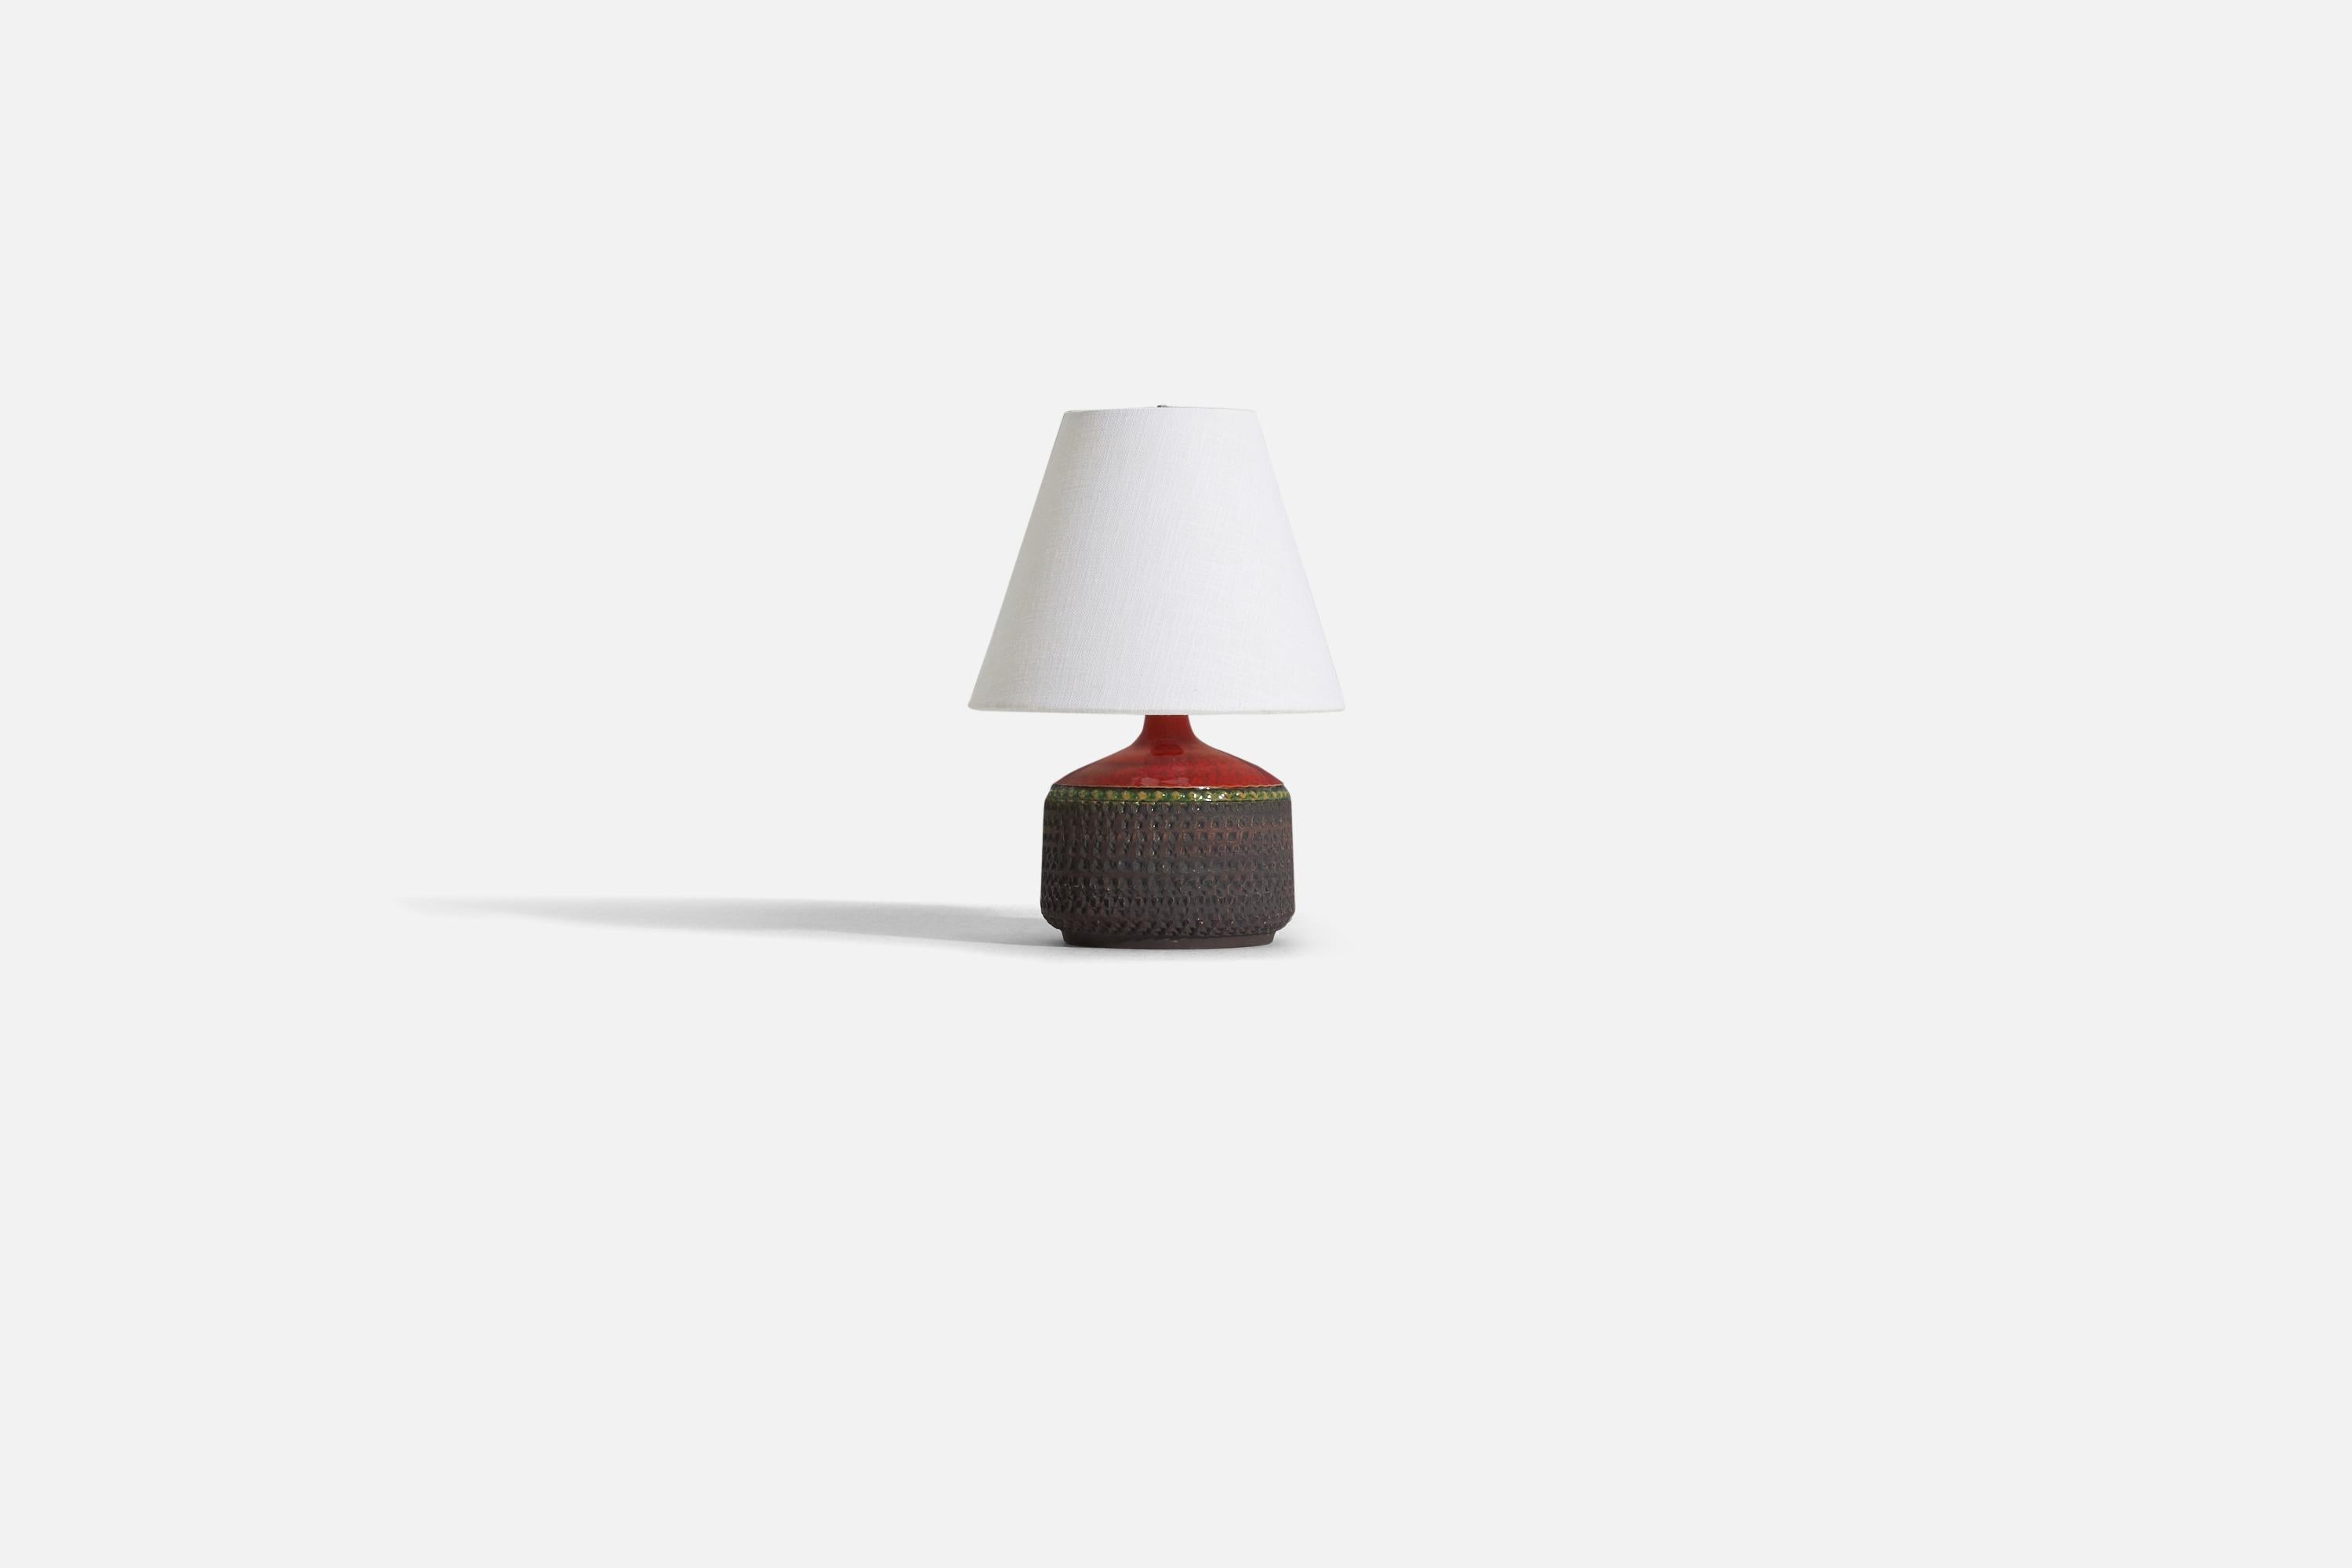 A red, green, and yellow glazed stoneware table lamp, produced by Klase Höganäs, Sweden, 1960s.

Sold without lampshade. 

Dimensions of lamp (inches) : 7.25 x 5.25 x 5.25 (H x W x D)
Dimensions shade (inches) : 4 x 8 x 6.5 (T x B x